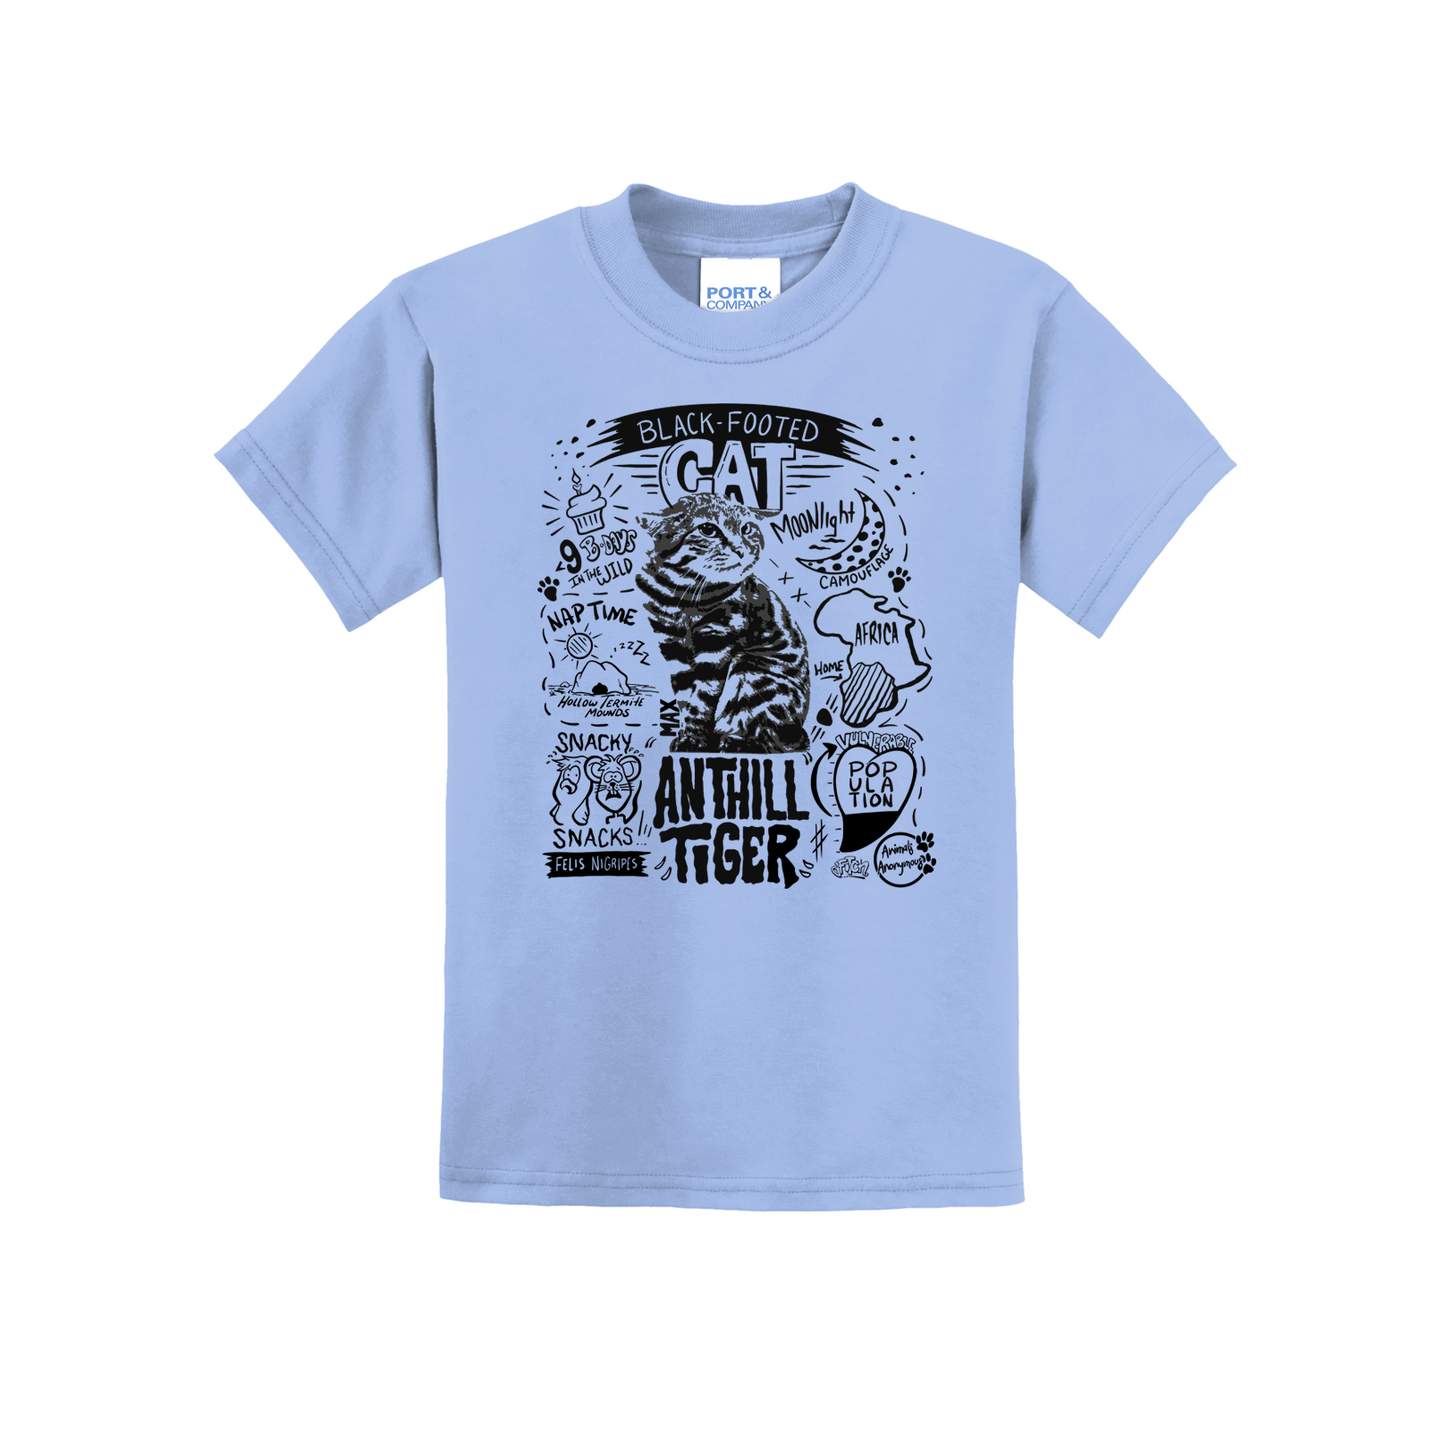 Black Footed Cat Fundraiser - YOUTH Tee (Pre order)